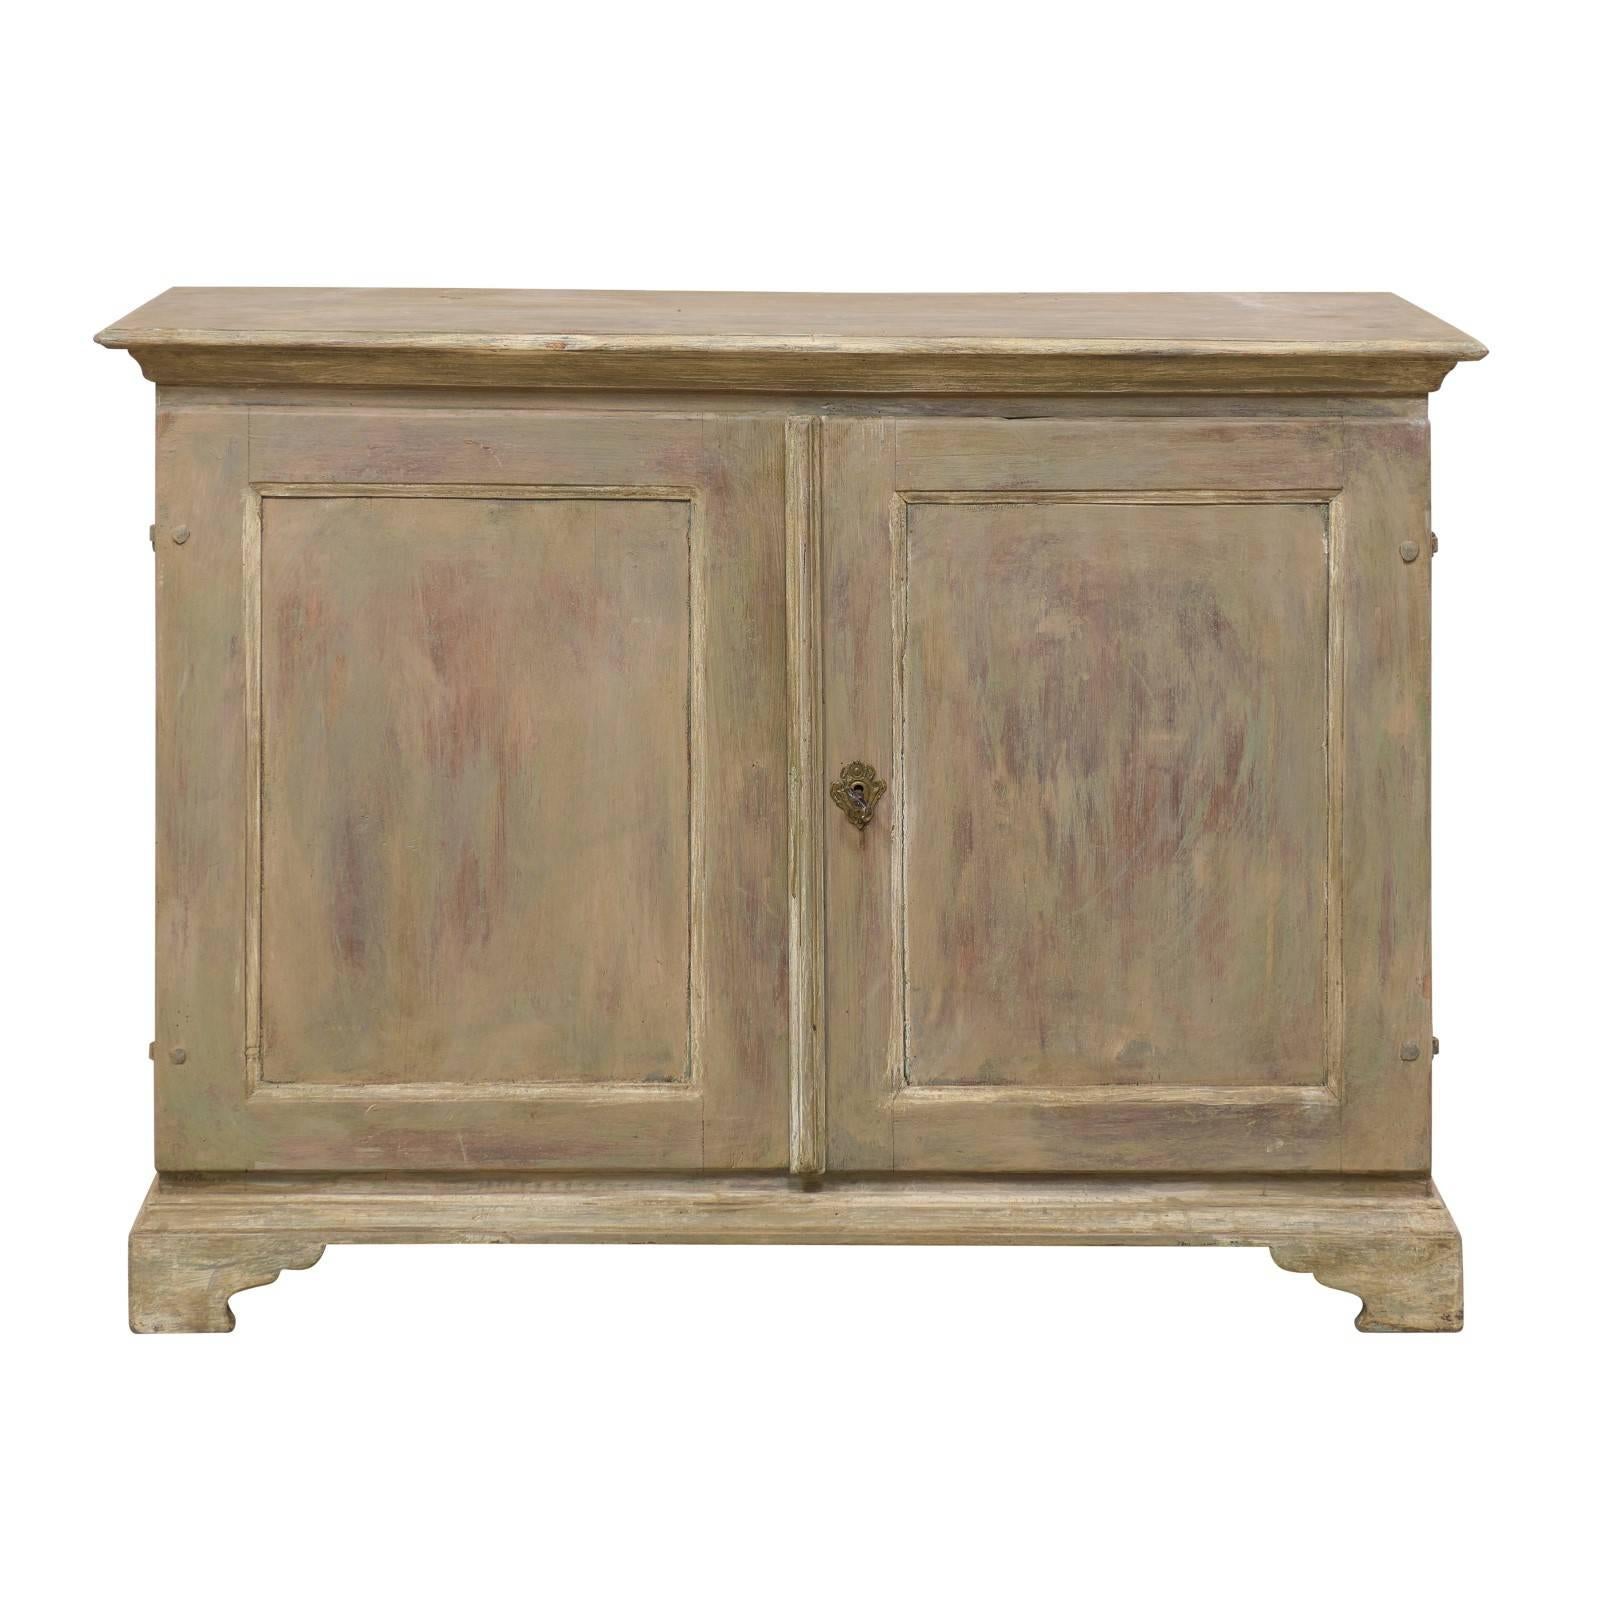 Swedish 19th Century Painted Wood Two-Door Buffet Cabinet in Soft Grey Tones